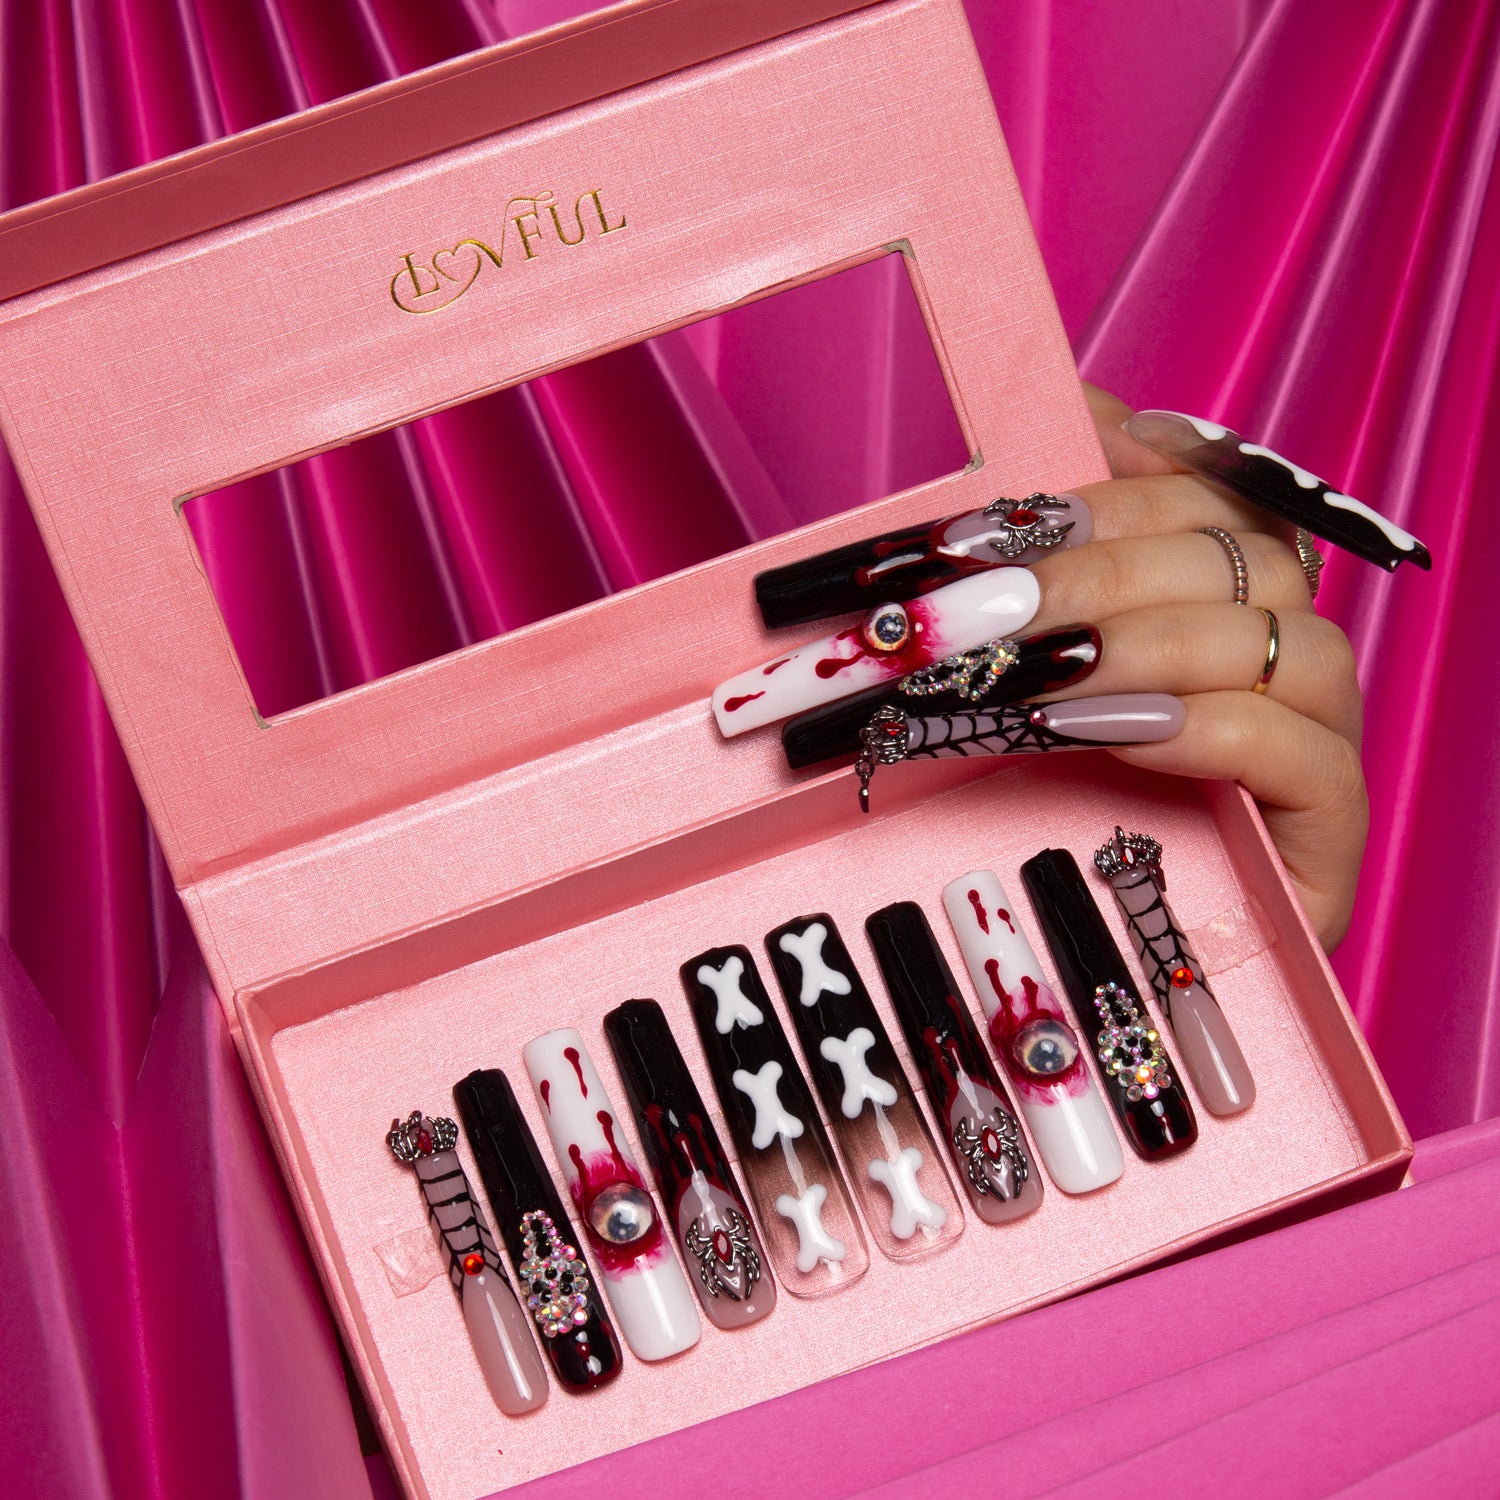 Boxed set of Lovful 'Final Destination' press-on nails with spooky designs including blood drips, bones, eyes, and spider webs, in red, black, and white hues, perfect for Halloween.